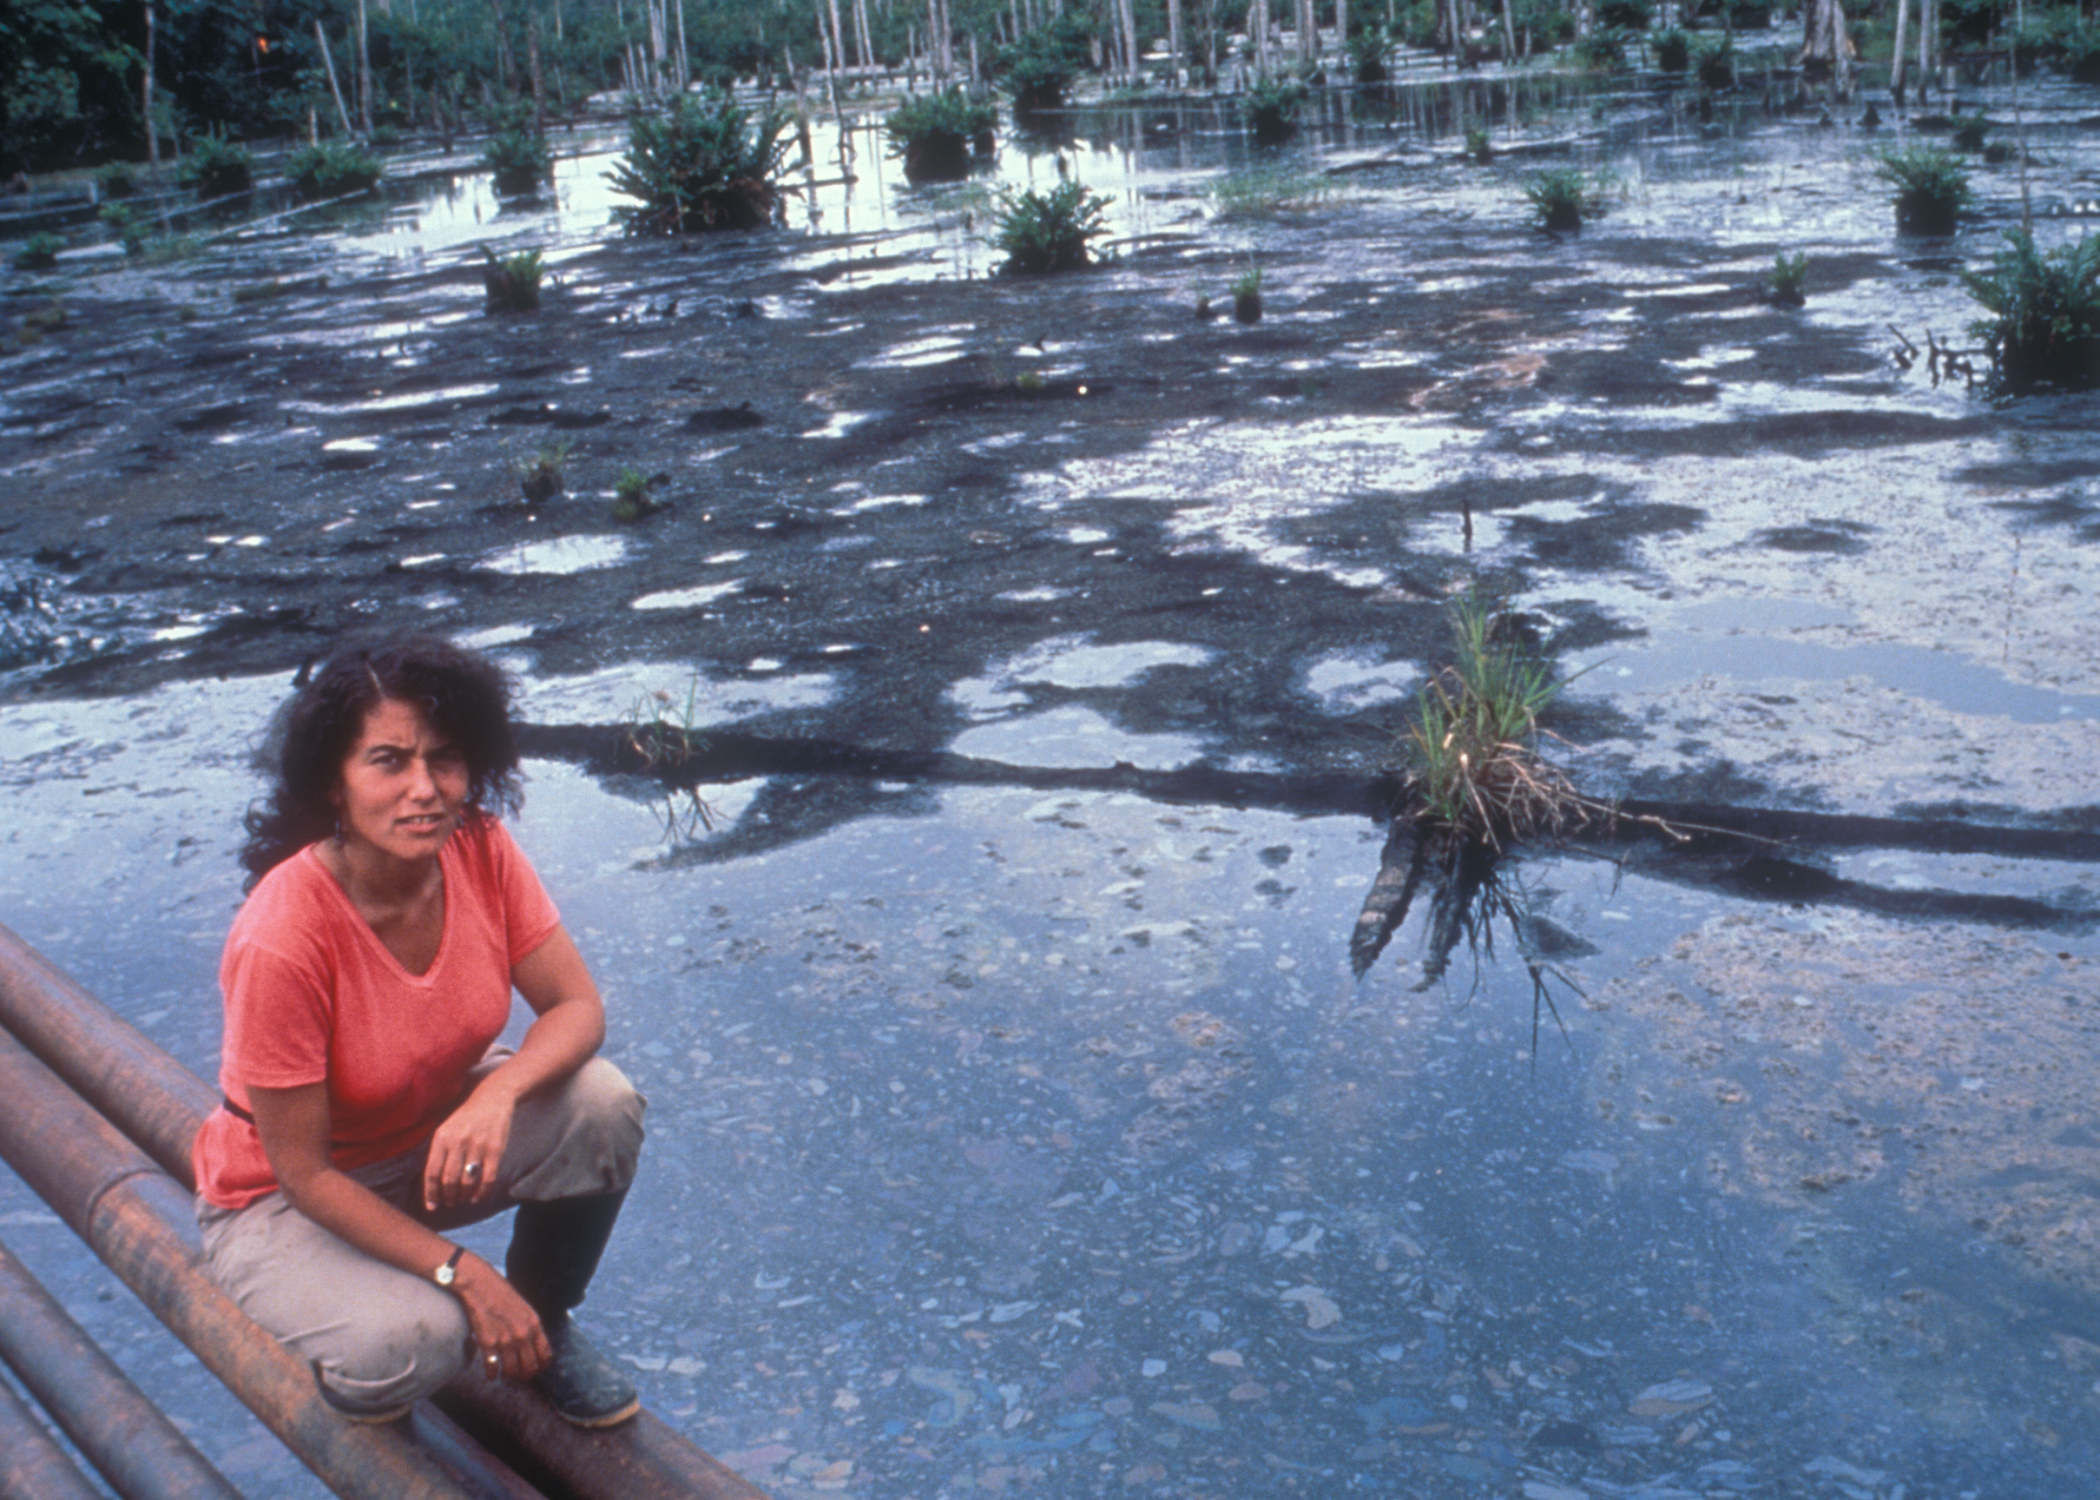 Judith Kimerling kneeling on pipelines above a drilling waste pit in the Ecuadorian Amazon in July 1990. Credit: Courtesy of Judith Kimerling